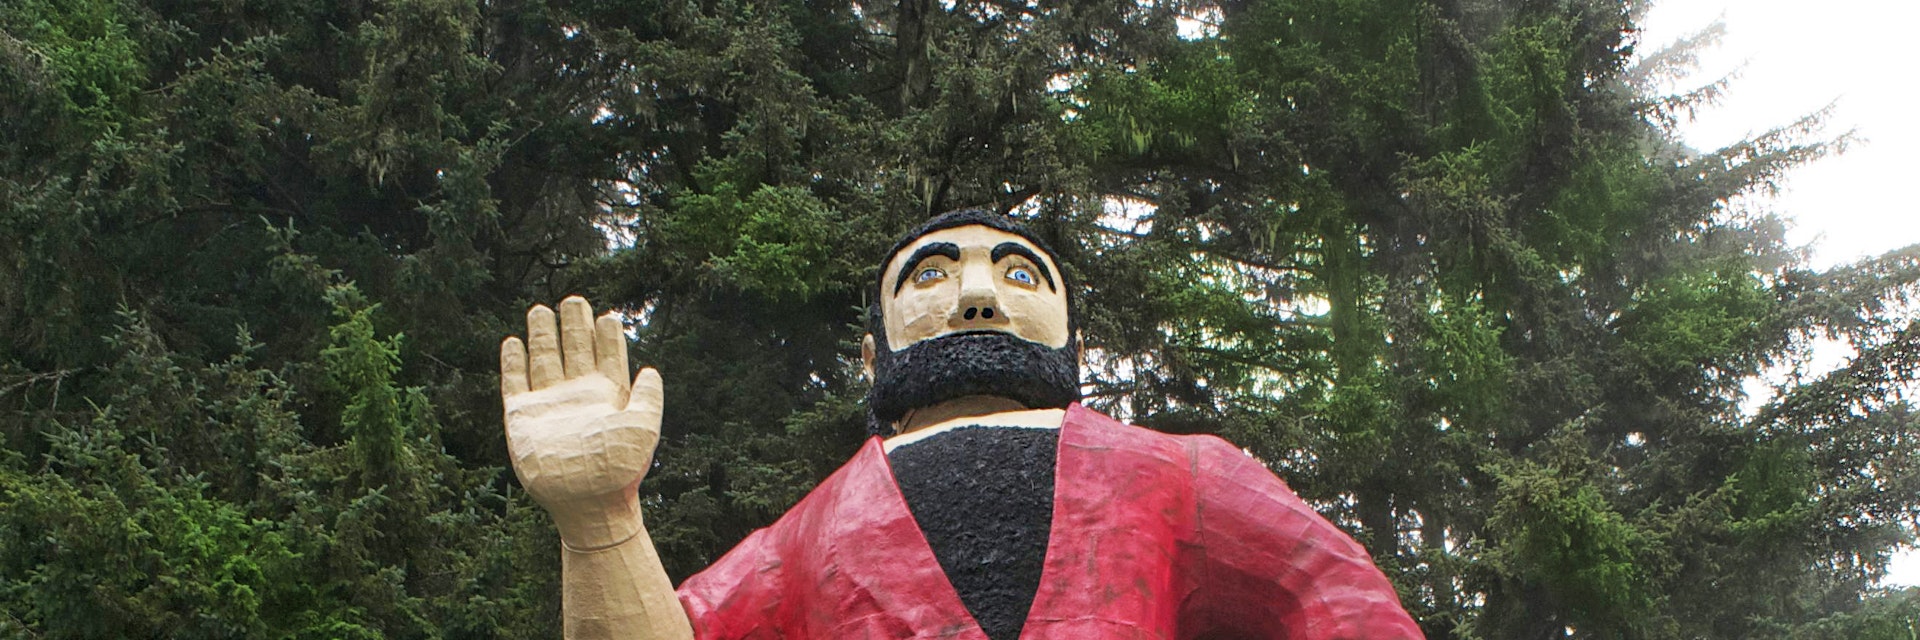 Paul Bunyan in parking lot at the Mystery of Trees. 42 feet tall. Woman at entrance gives a perspective to the size.